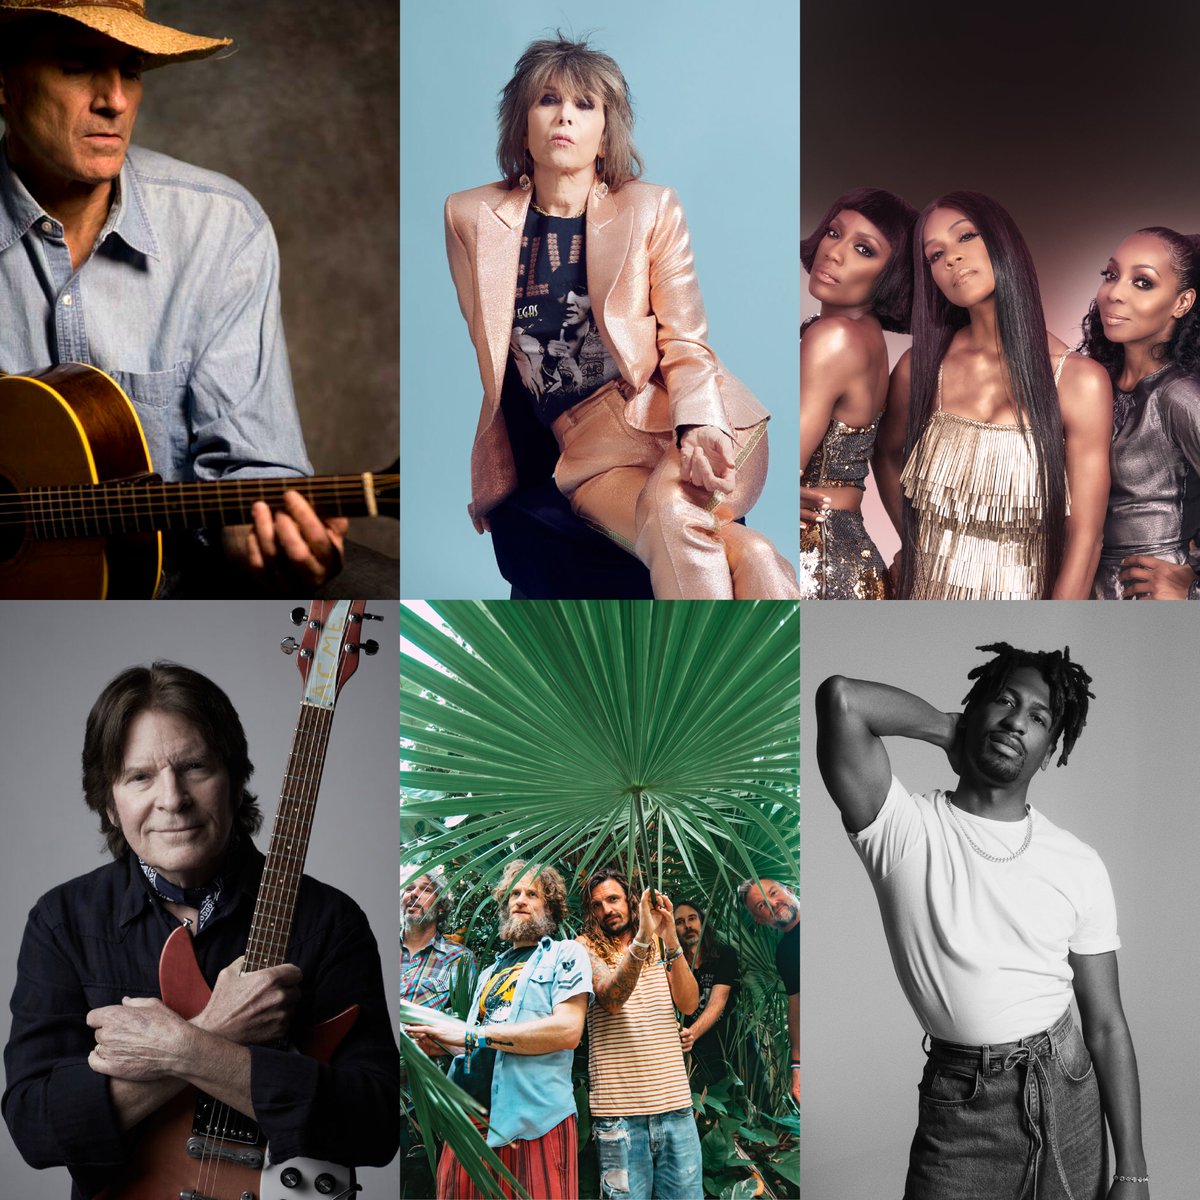 The stars shine so bright at Tanglewood this summer with @brandicarlile, @JonBatiste, the Indigo Girls, @John_Fogerty, @EnVogueMusic, and more in our Popular Artist series → bit.ly/439vadw